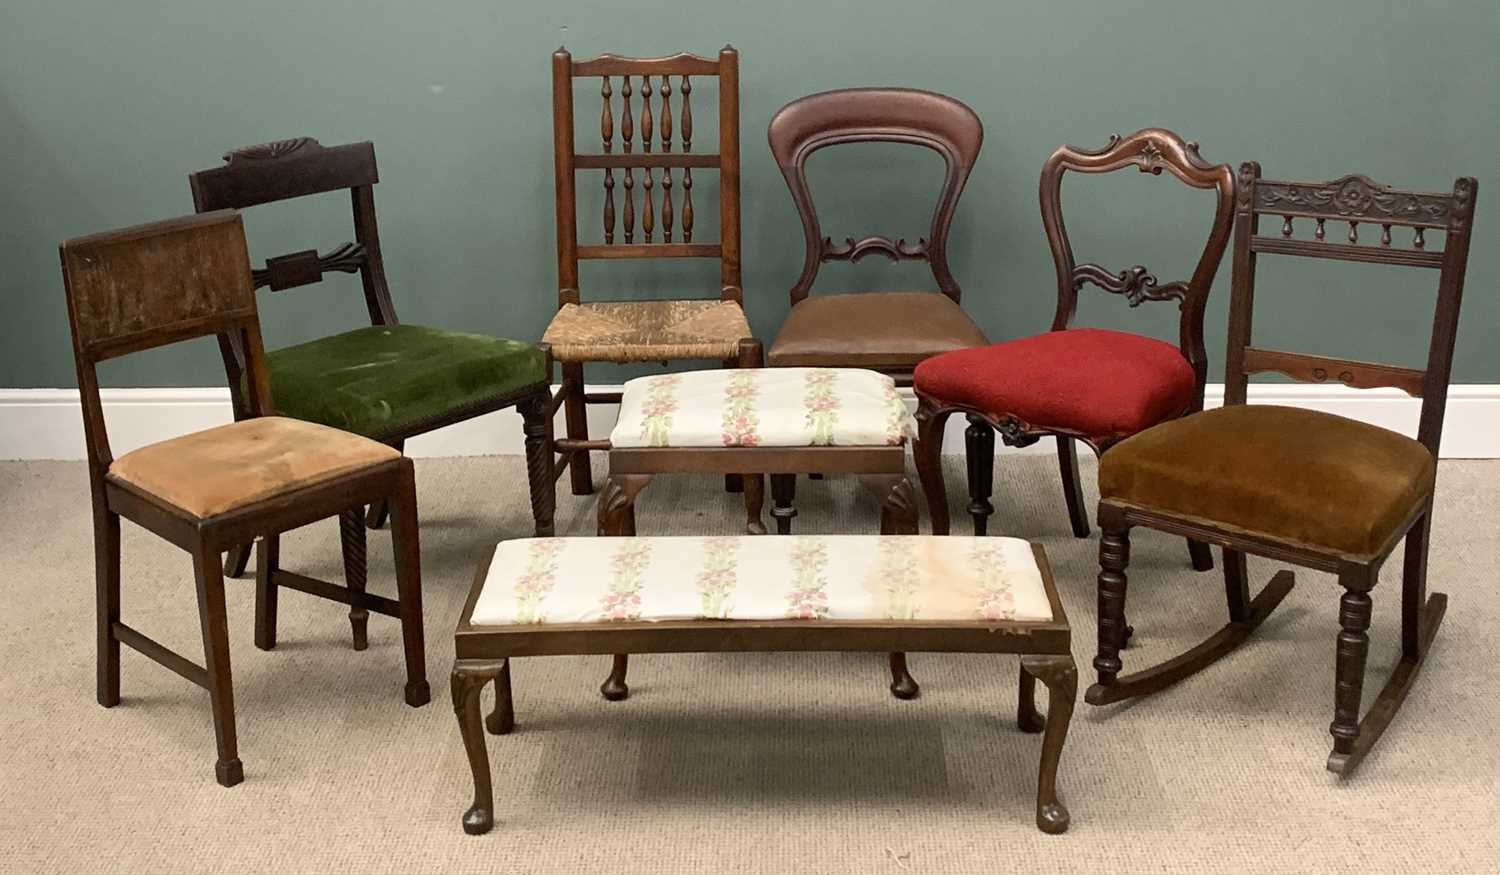 VARIOUS SEATING including a rocker and two footstools Provenance: Private collection Conwy